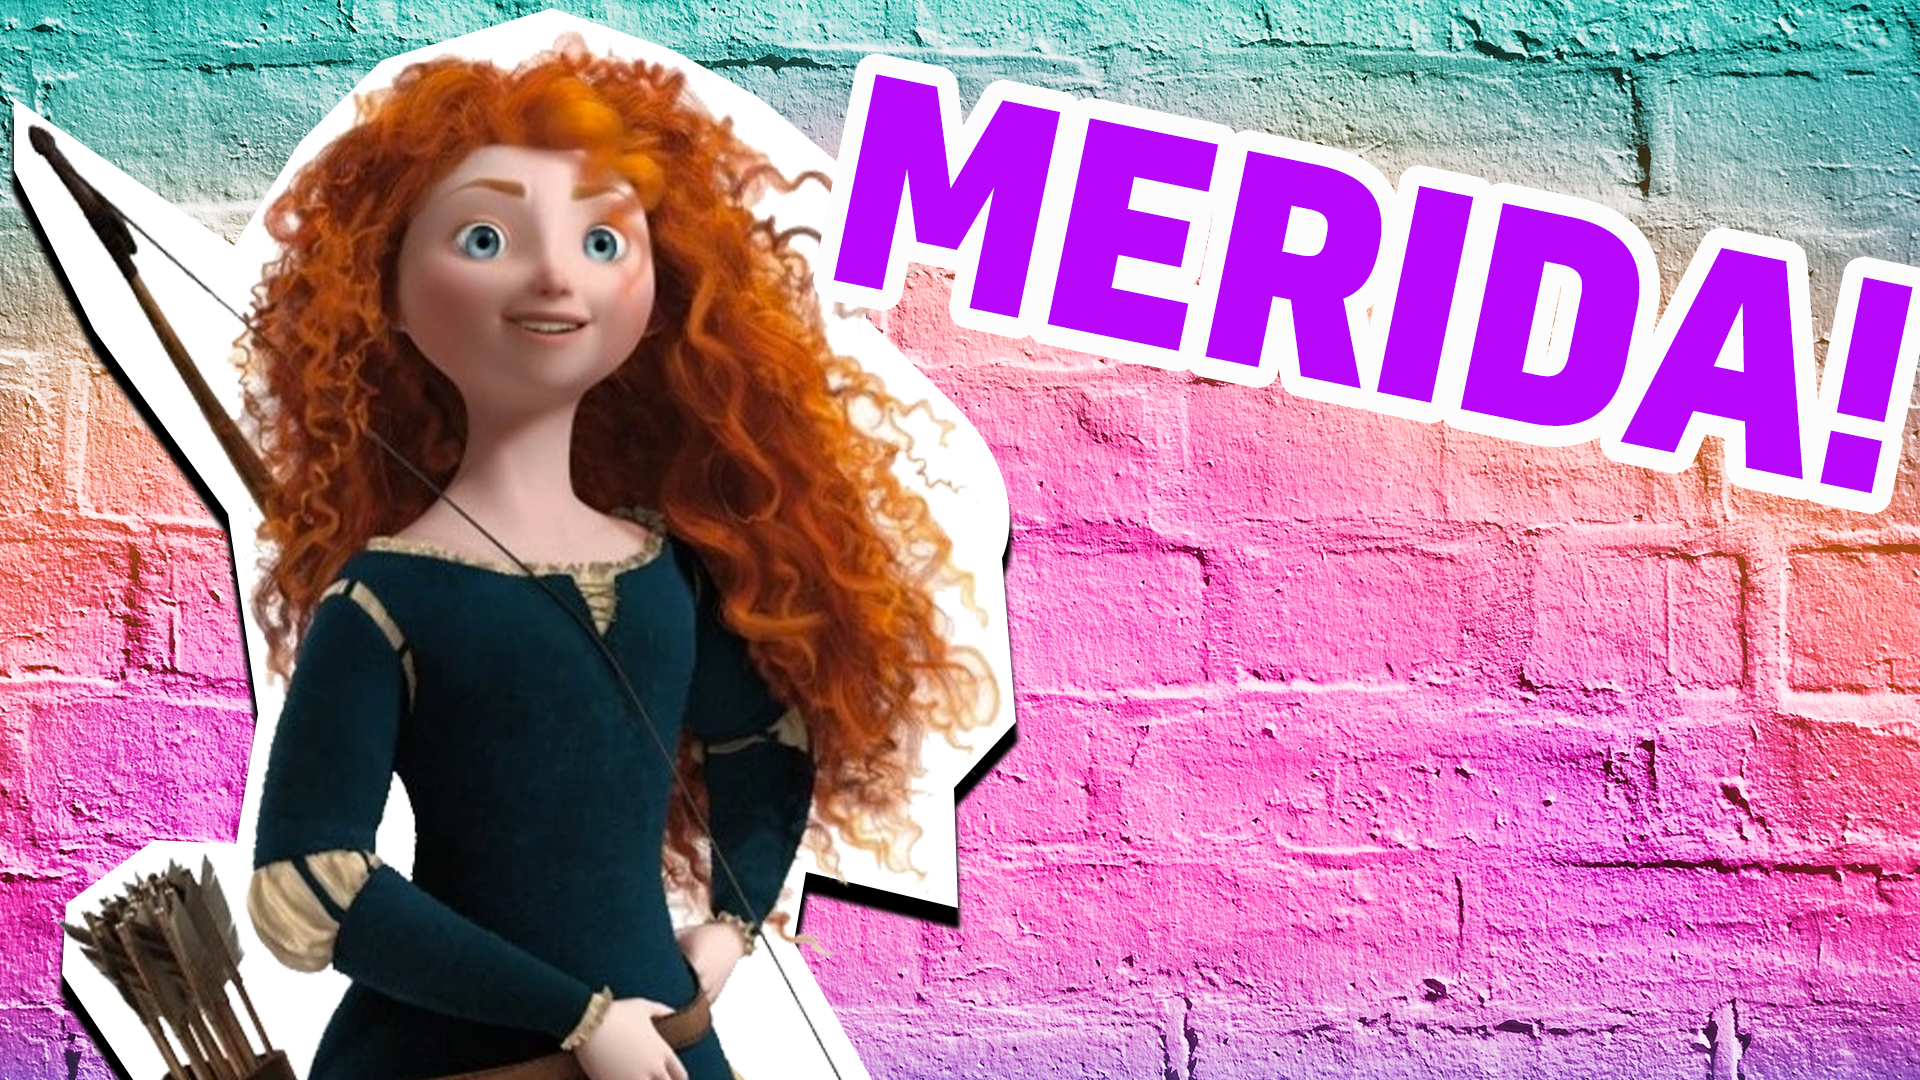 You're just like Merida! You're brave, you know your own heart, and you don't bow down to anyone!